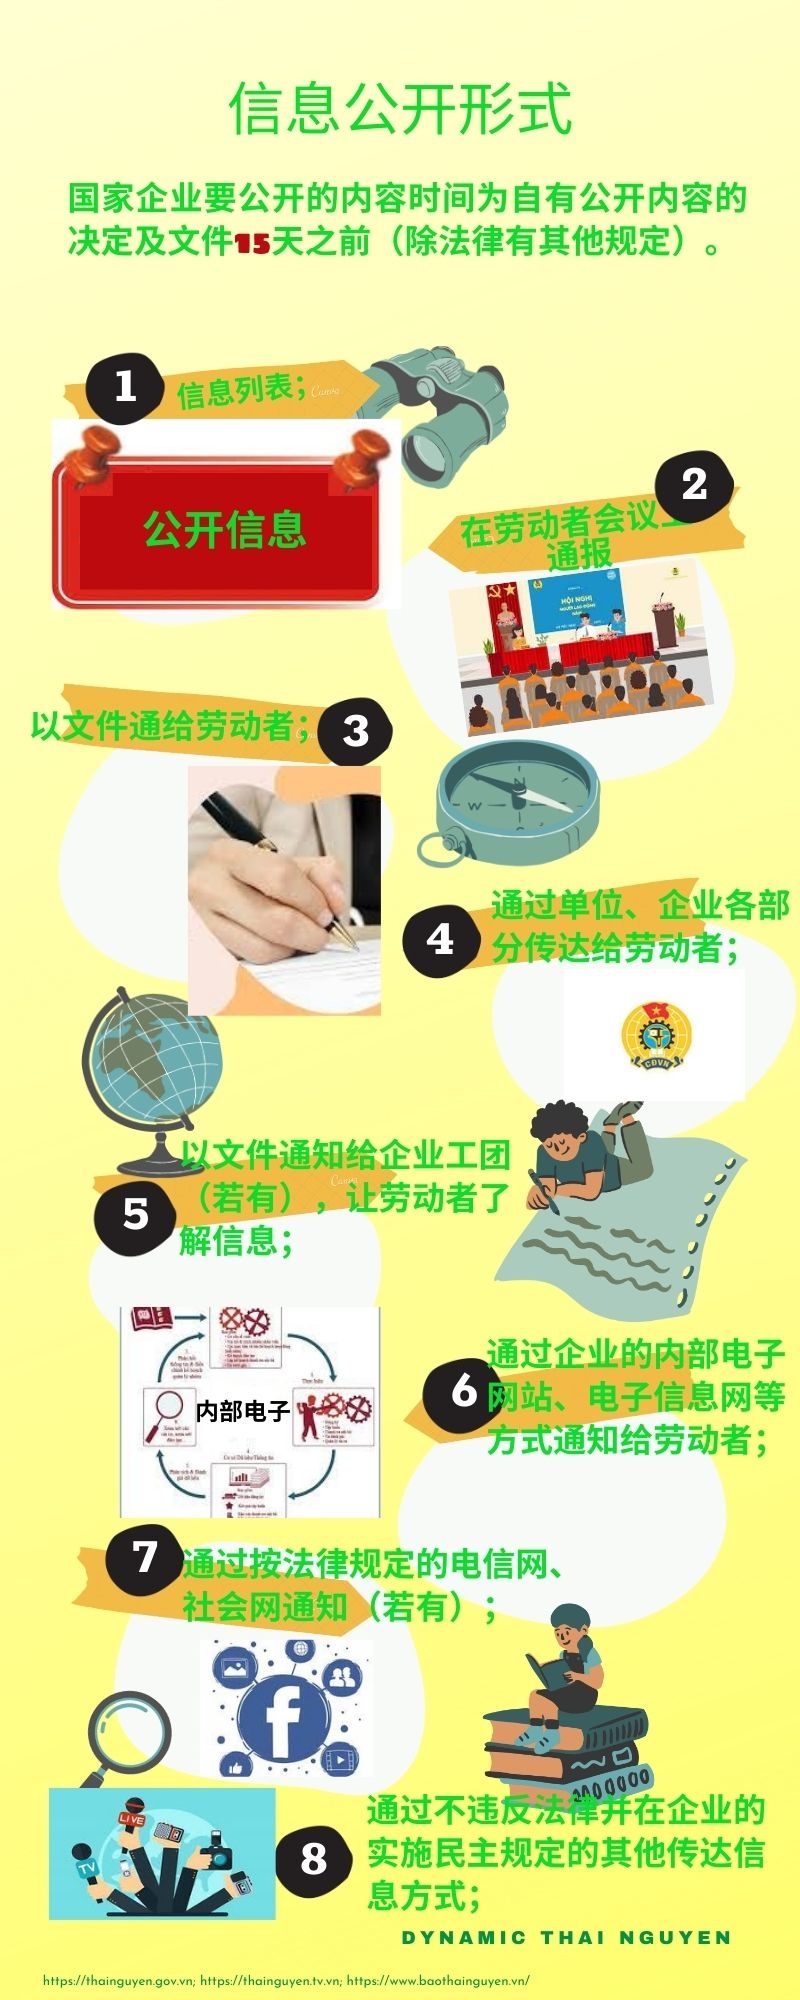 [INFOGRAPHIC] 国家企业要公开的内容